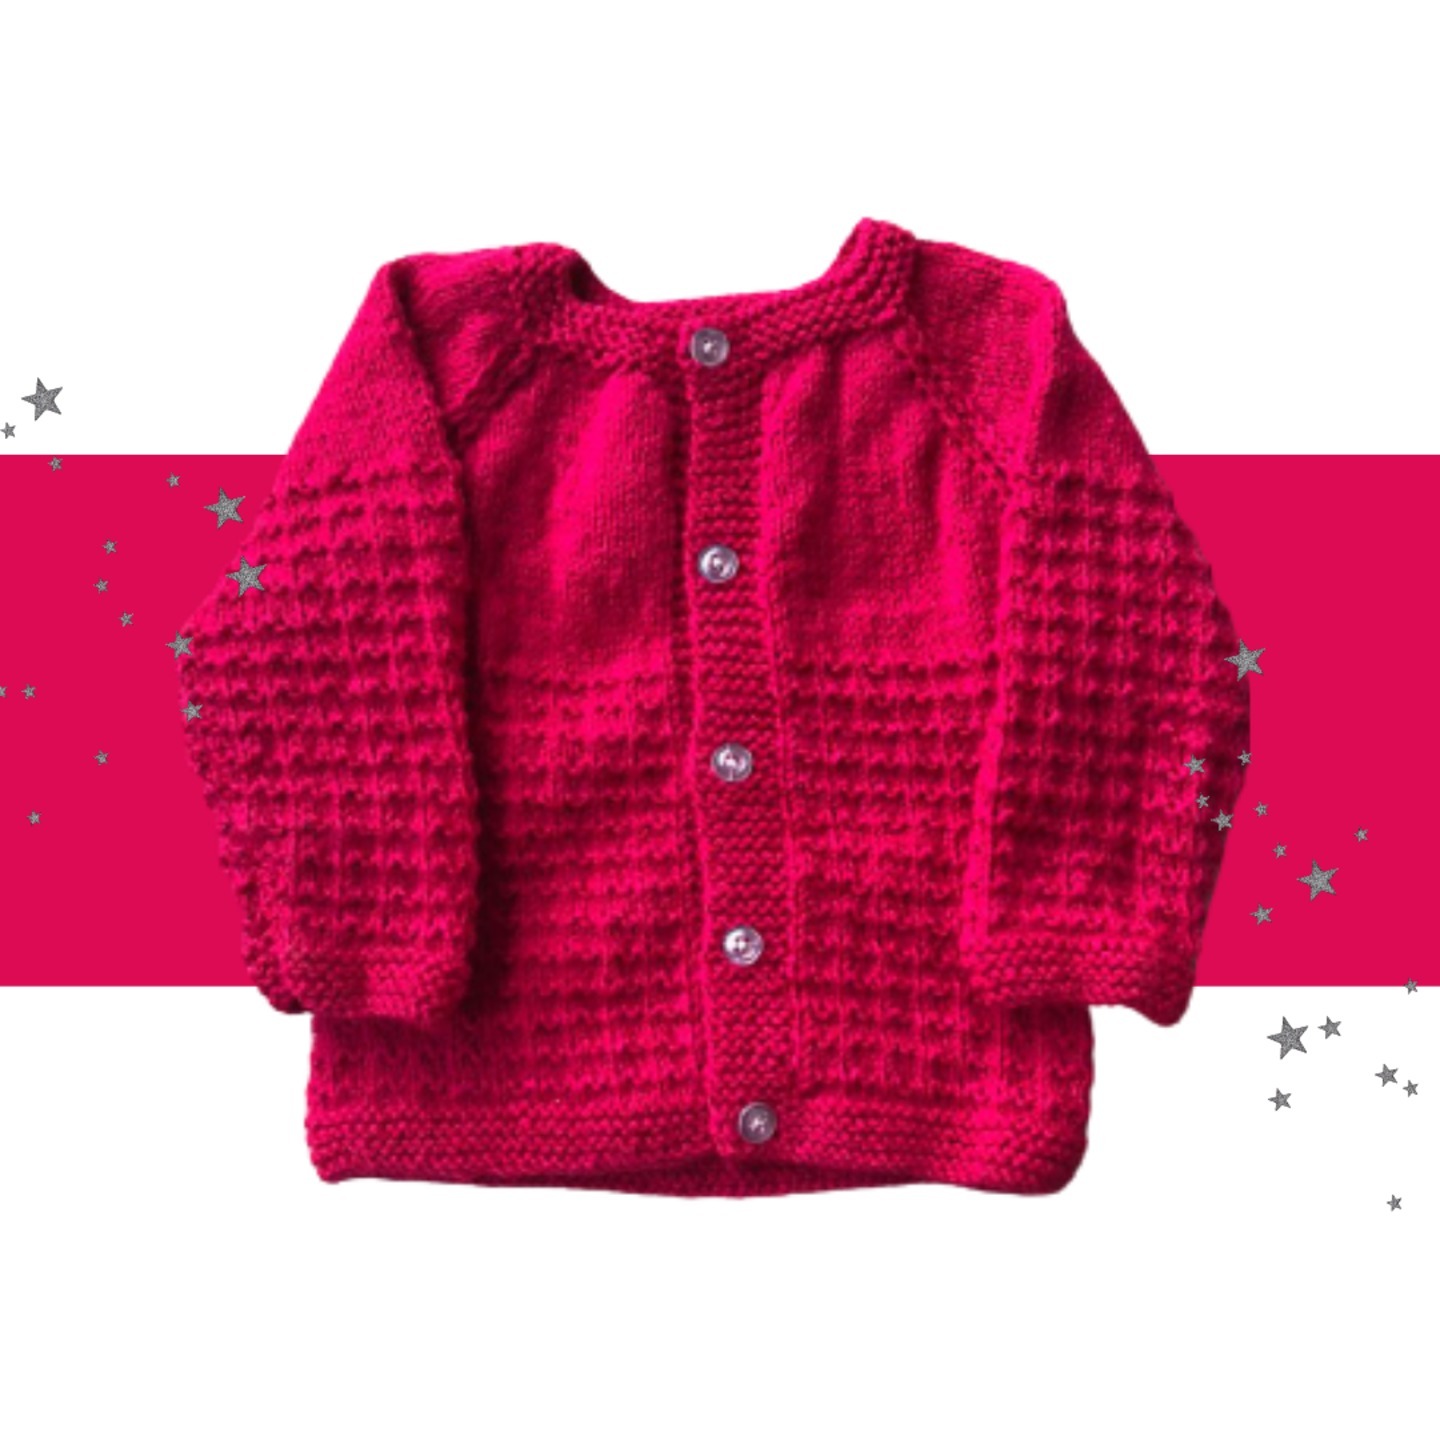 Handwoven Full Sleeves Sweaters for Newborn 0-3 Months